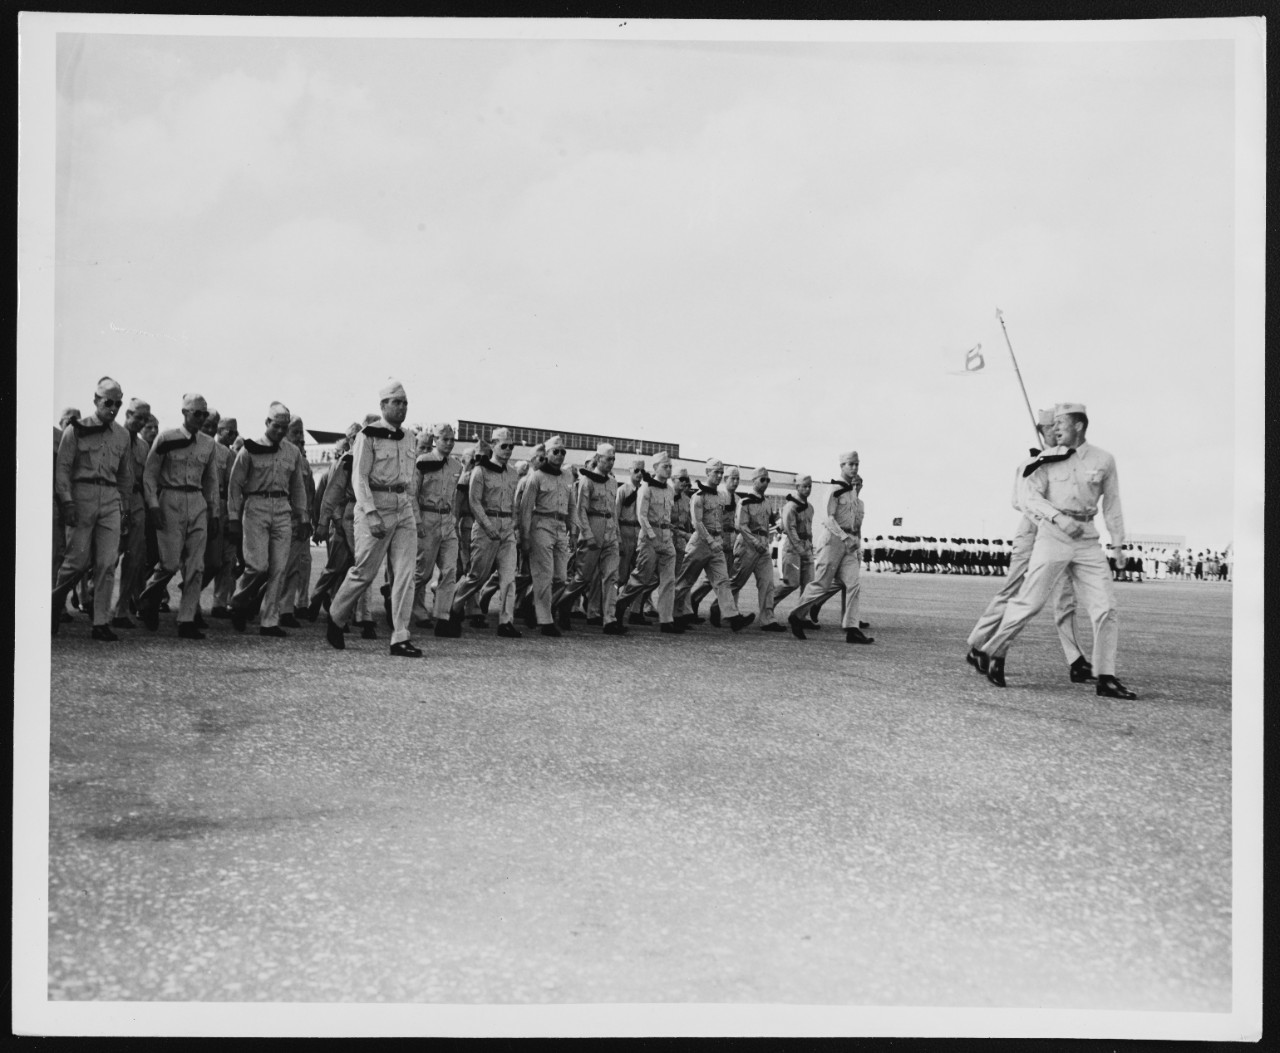 A Cadet Battalion Passes in Review at "Nimitz Day"